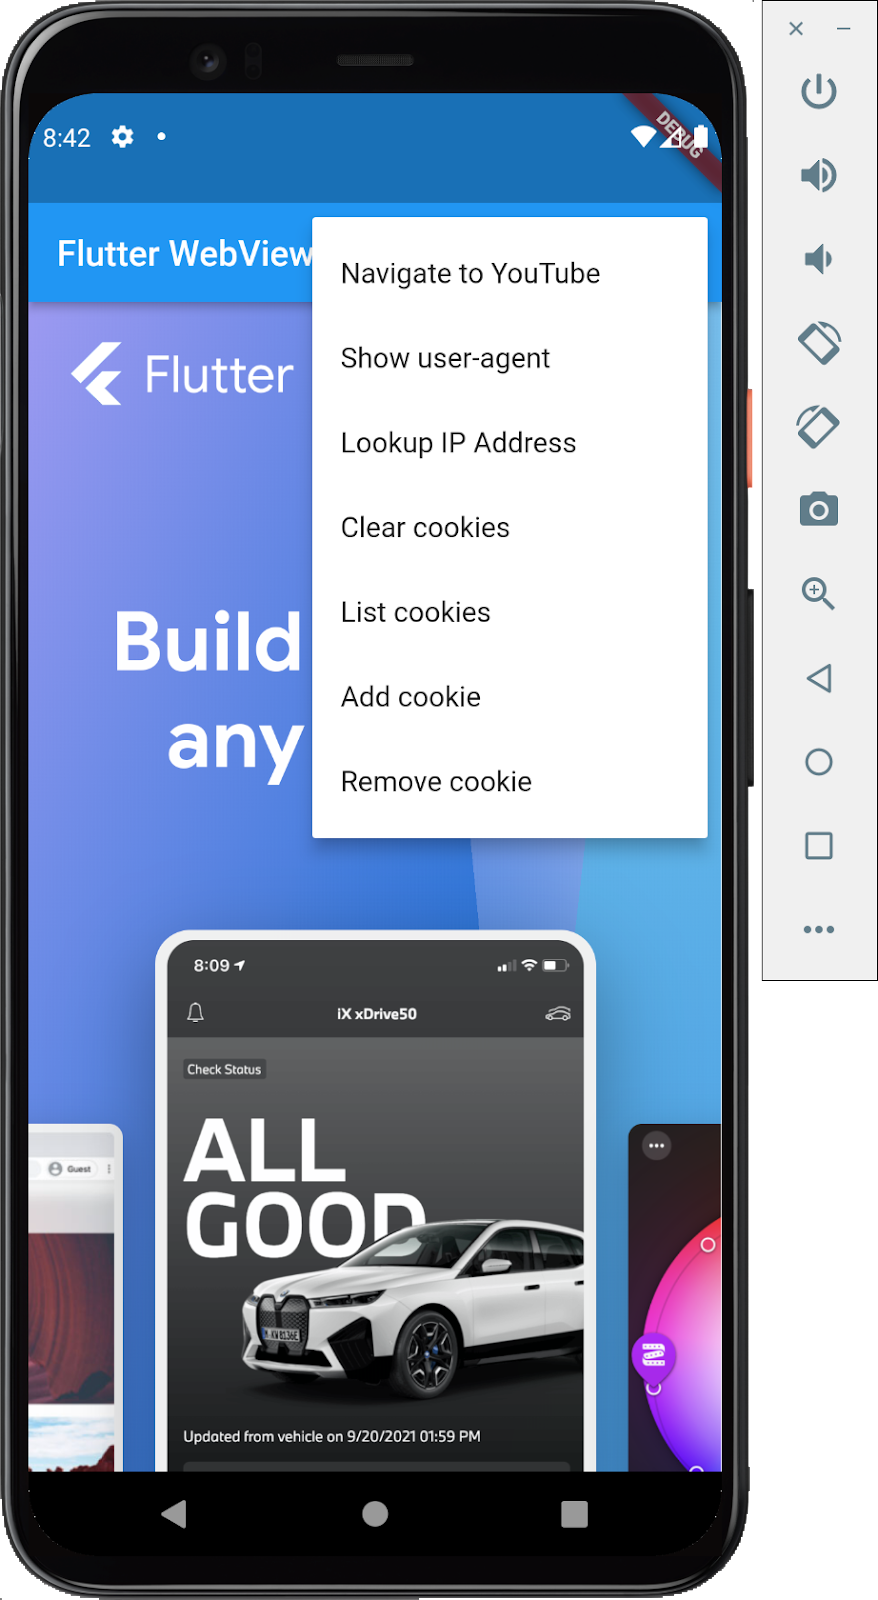 A screen shot of an Android emulator running a Flutter app with an embedded webview showing the Flutter.dev homepage with a list of menu options covering navigating to YouTube, showing user agent, and interacting with the browser's cookie jar